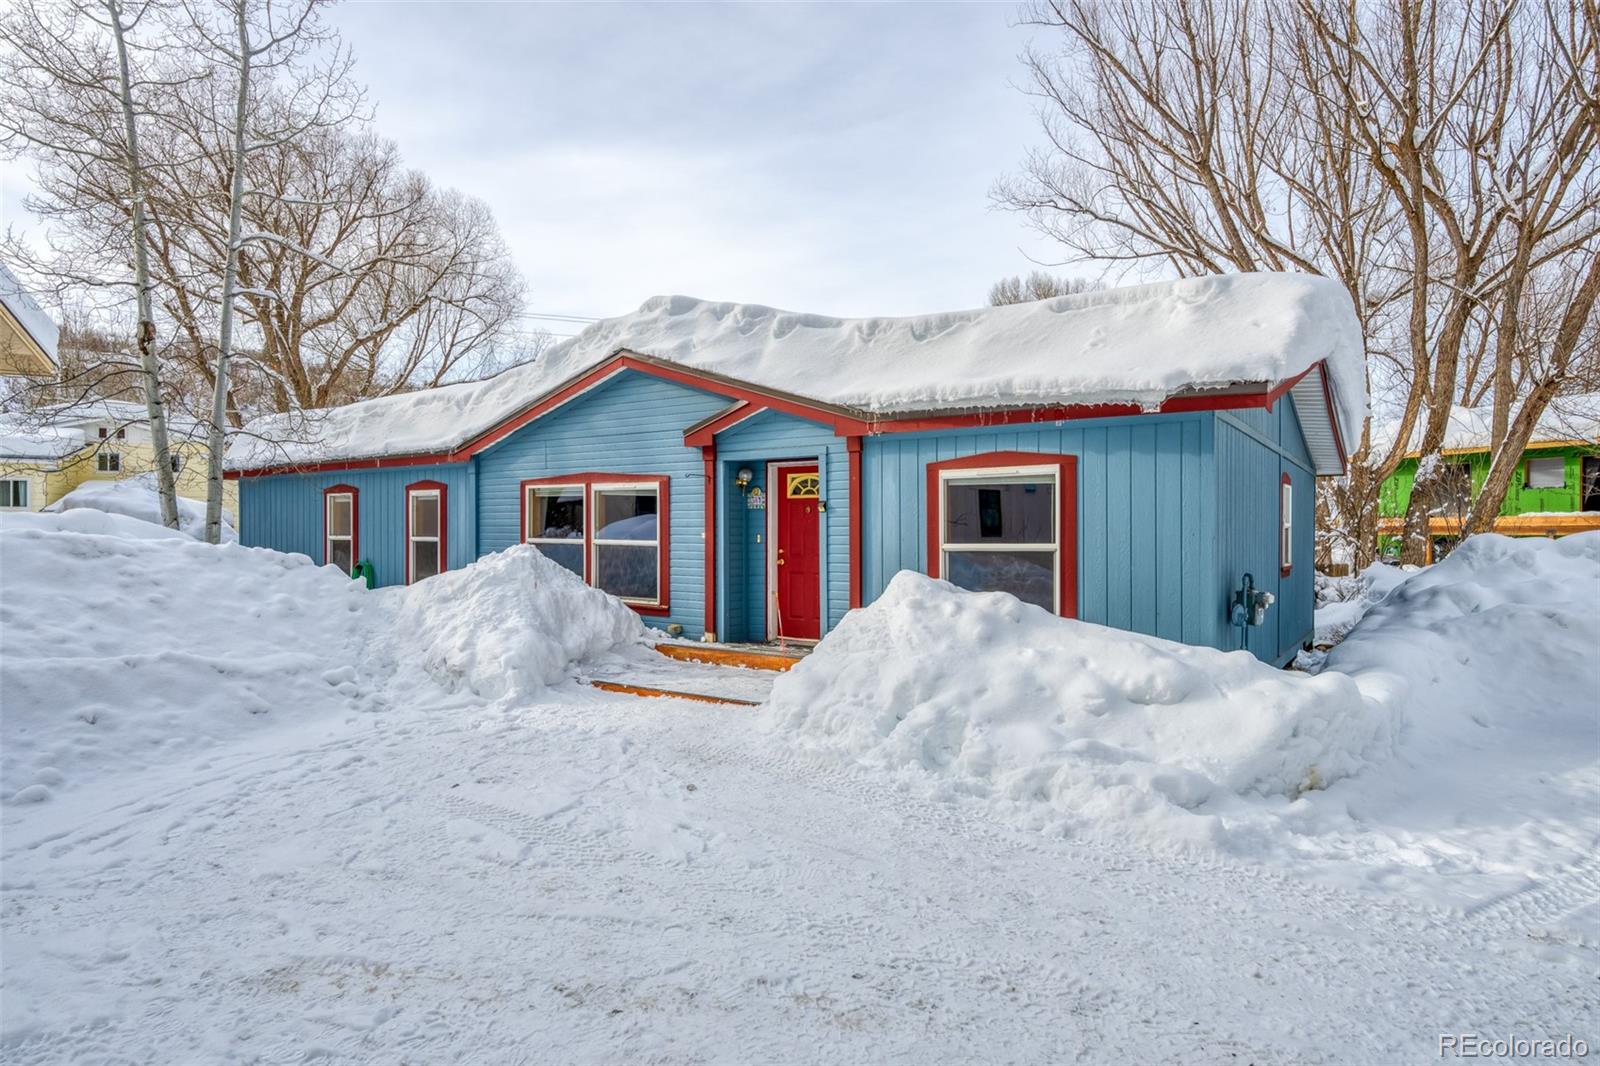 Sold 381 River Road, Steamboat Springs, CO 80487, Downtown Area 3 Beds / 2 Full Baths $1,125,000 pic